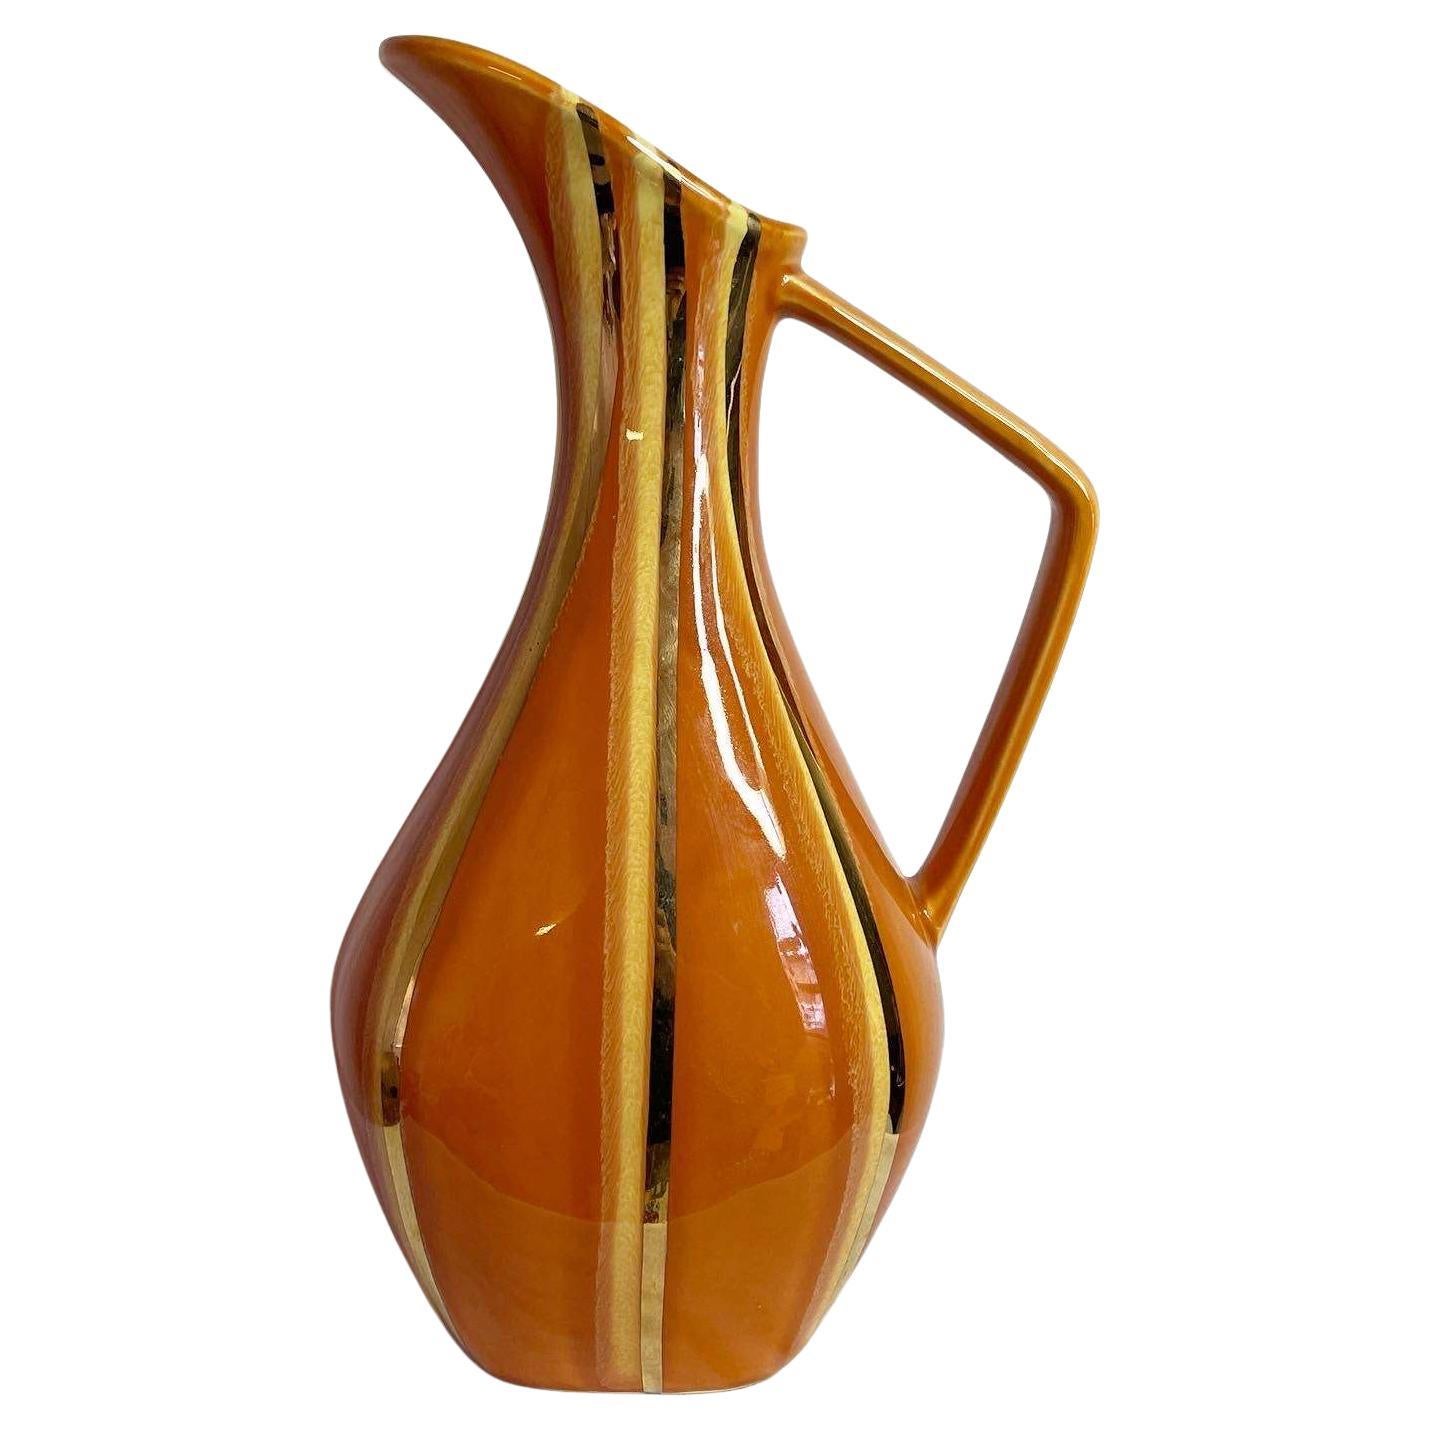 https://a.1stdibscdn.com/mid-century-modern-orange-gold-yellow-pitcher-continental-persimmon-by-hull-for-sale/22569652/f_357241521692129216679/f_35724152_1692129217075_bg_processed.jpg